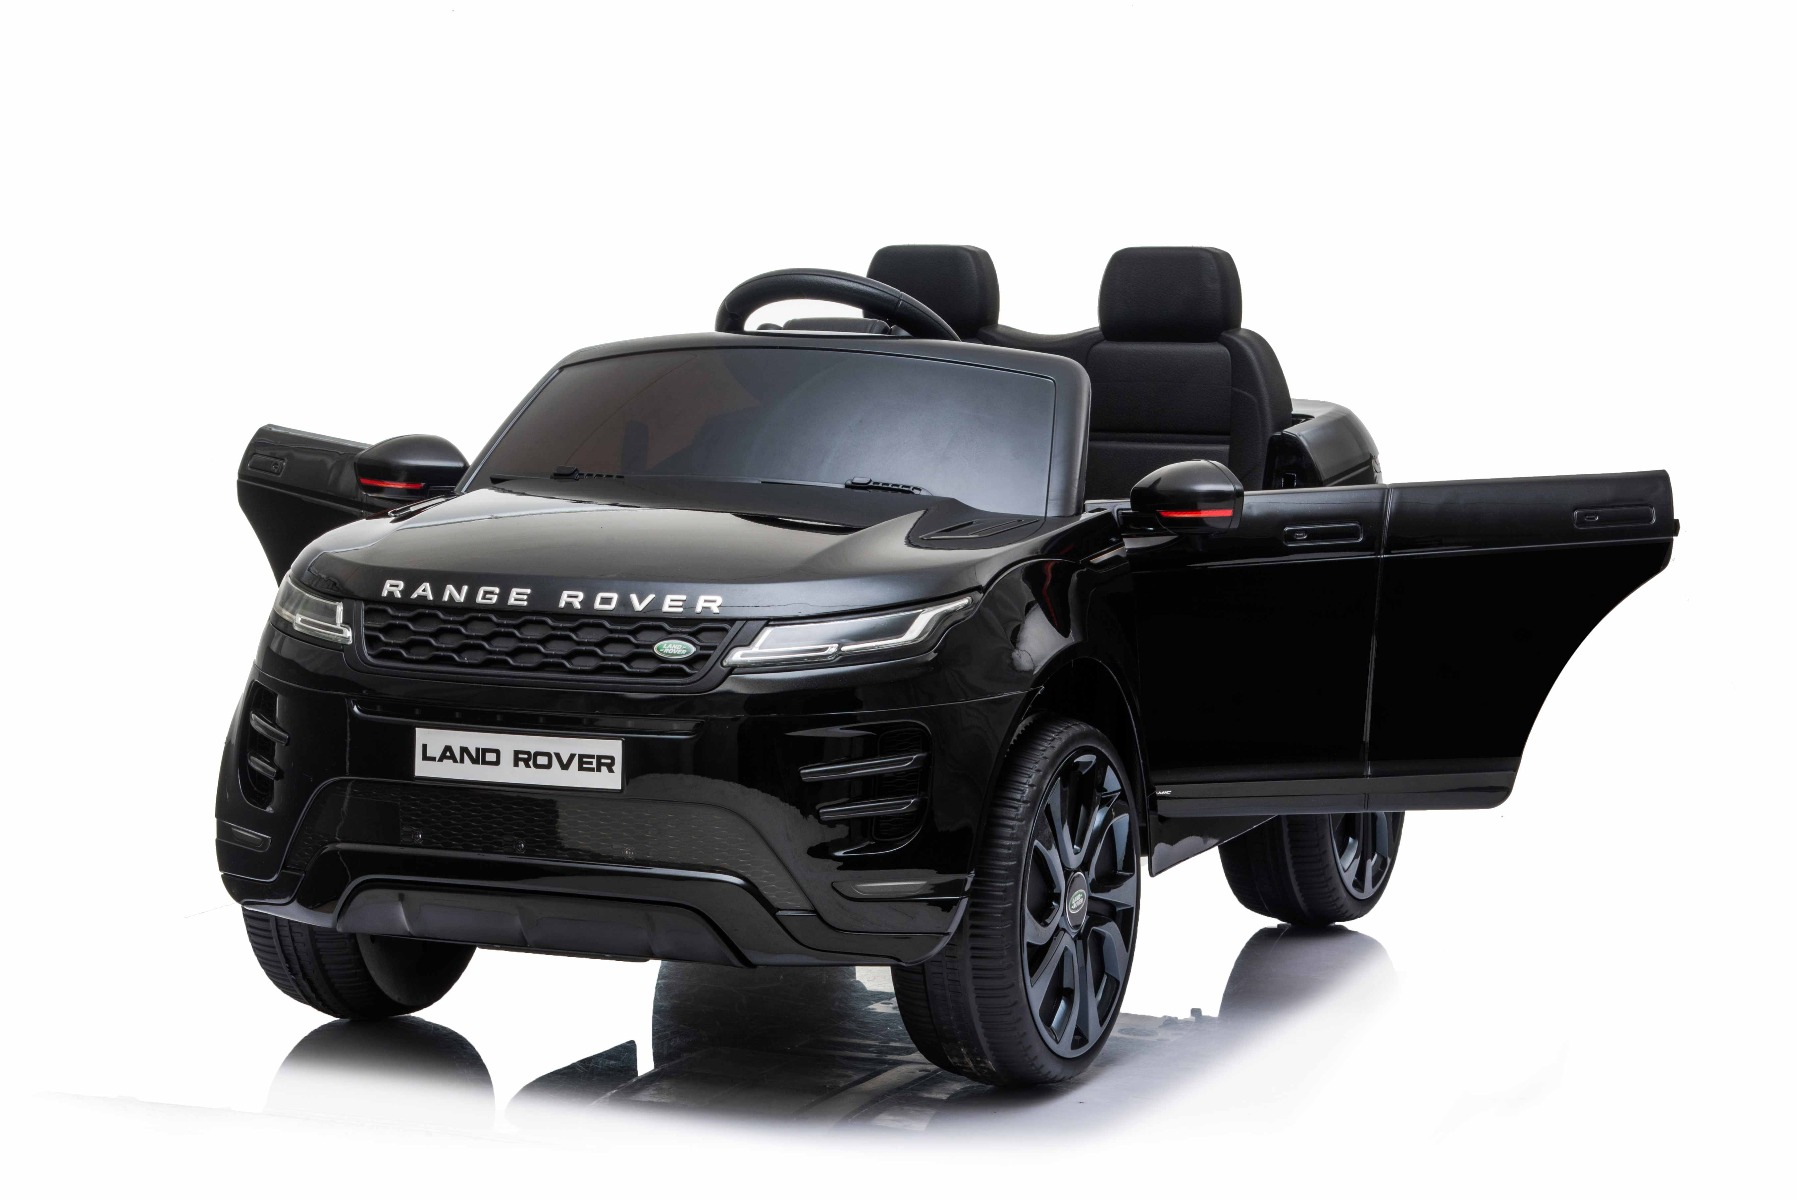 BLACK Ricco TOYS 12V Range Rover Evoque Licensed Kids Electric Ride On Car with MP3 and Remote Control